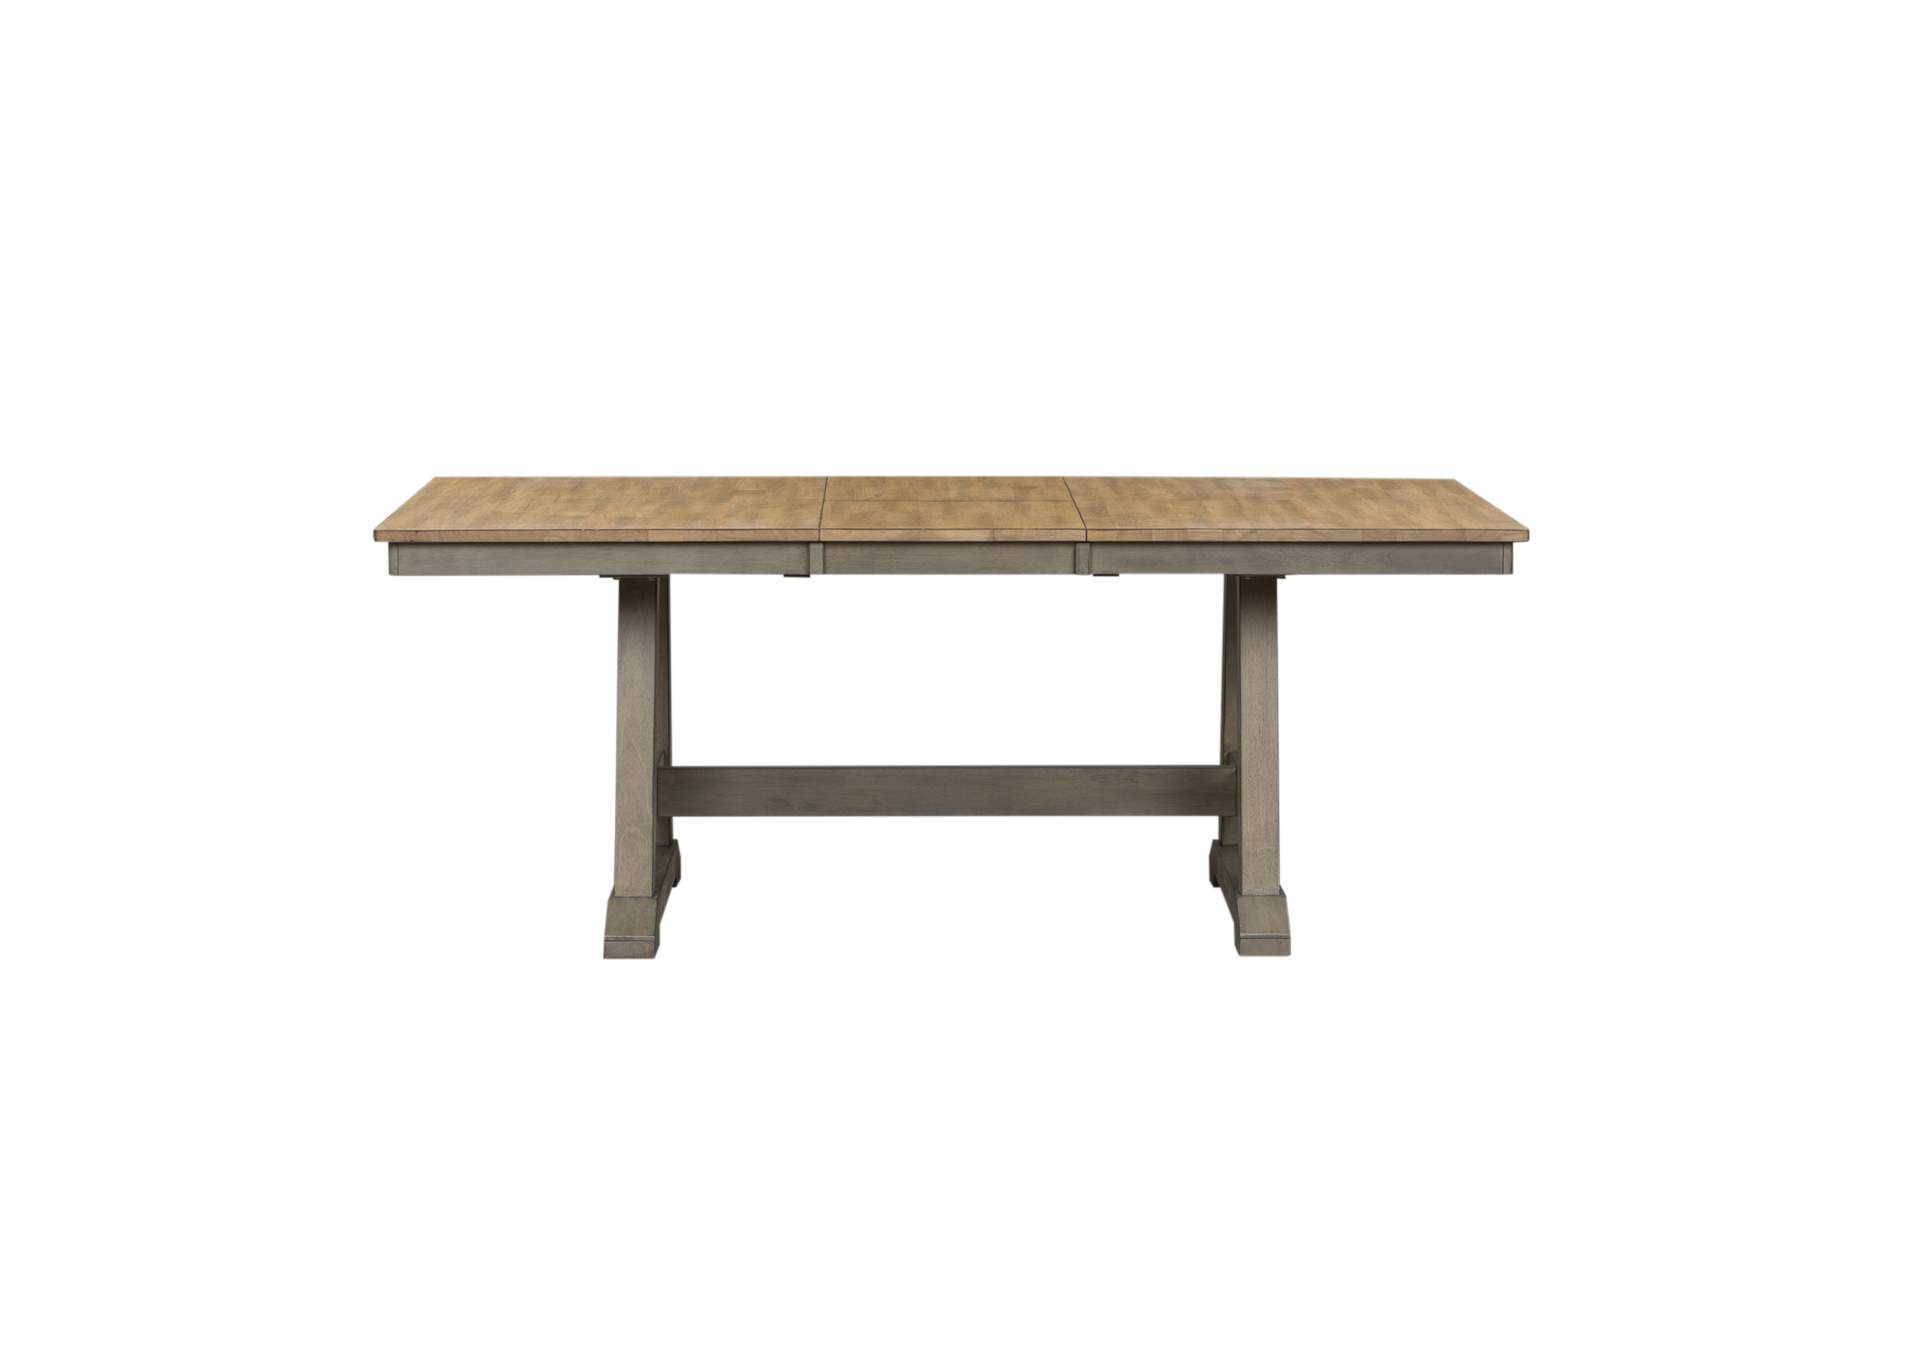 Lindsey Farm Brown/Gray Extension Leaf Dining Table,Liberty